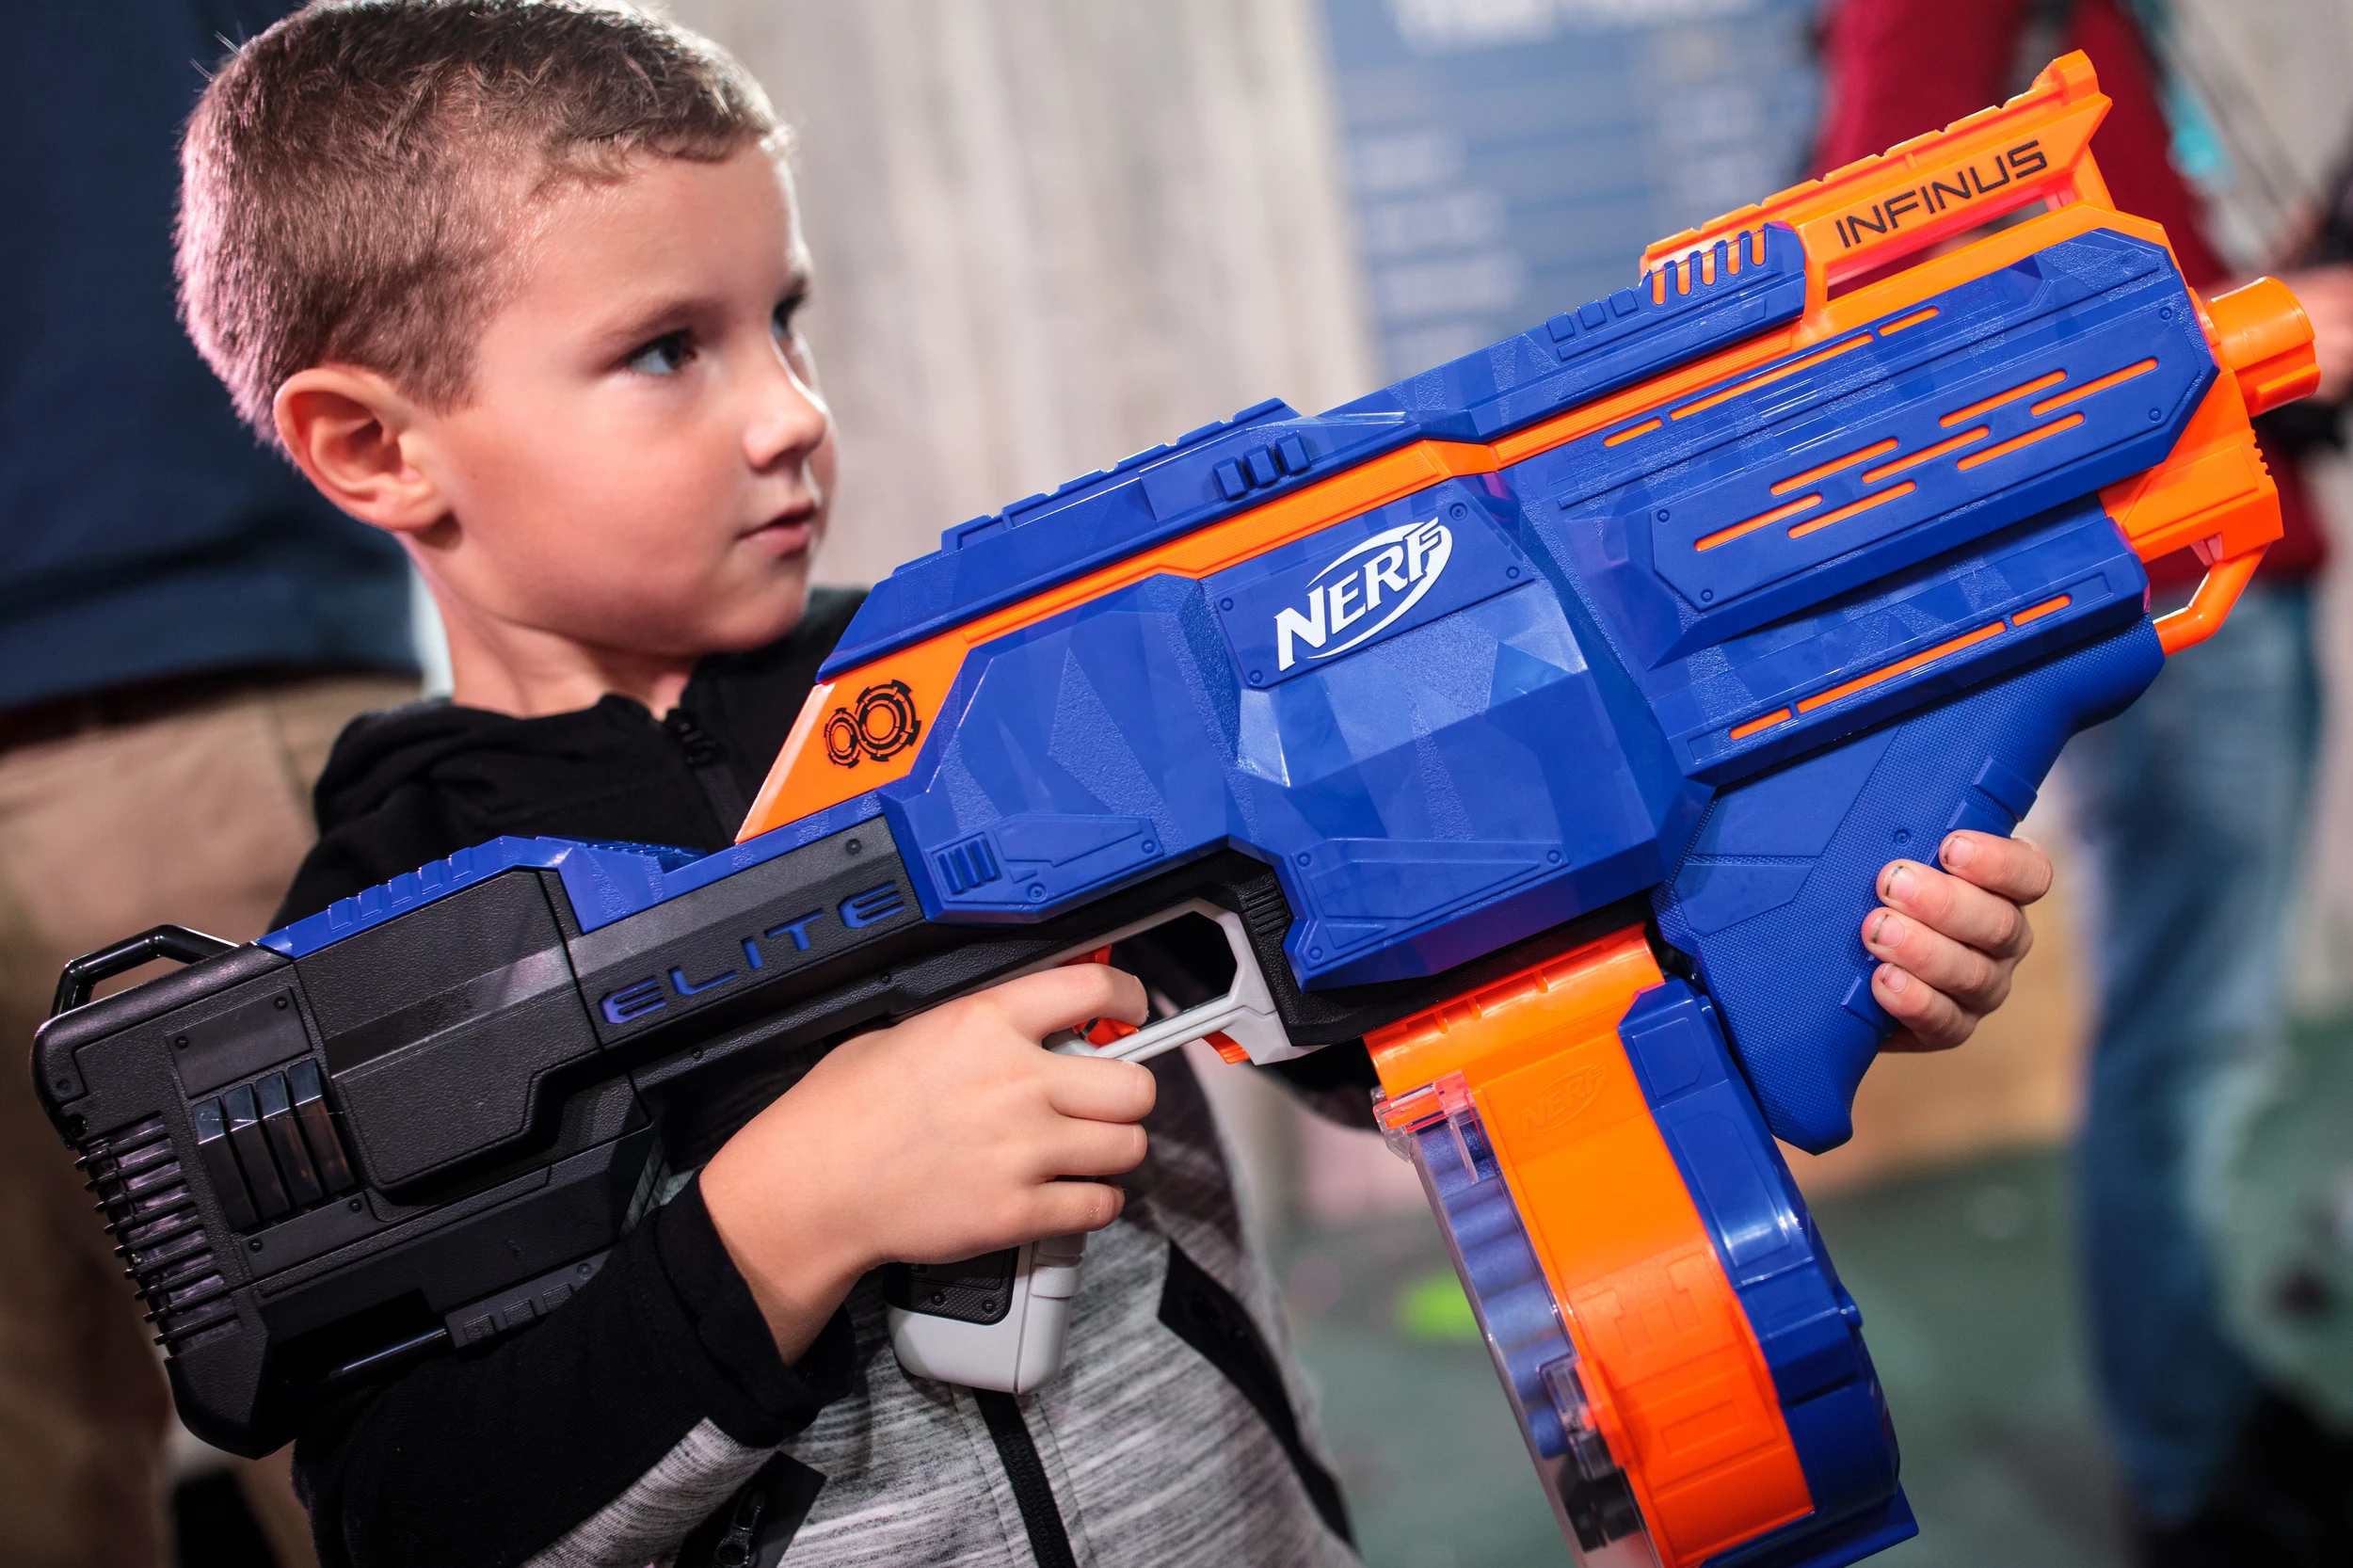 Danvers, Woburn Indoor Nerf Arenas Short Trip from the SouthCoast